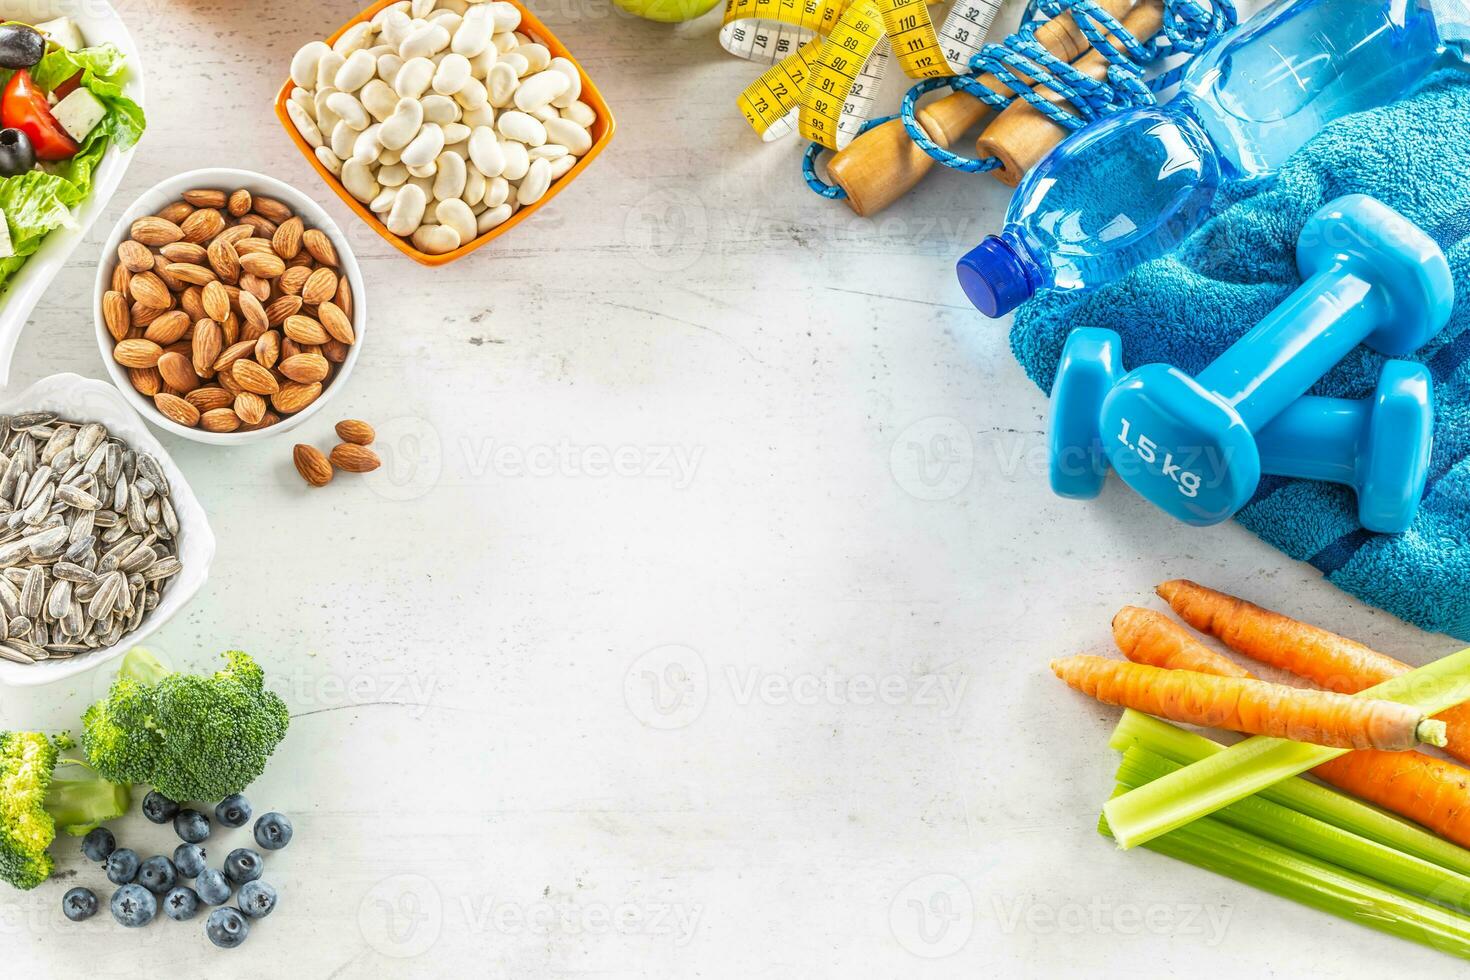 Selection of healthy foods, vegetables, fruits, almonds, salad, exercise tools and measuring tape photo